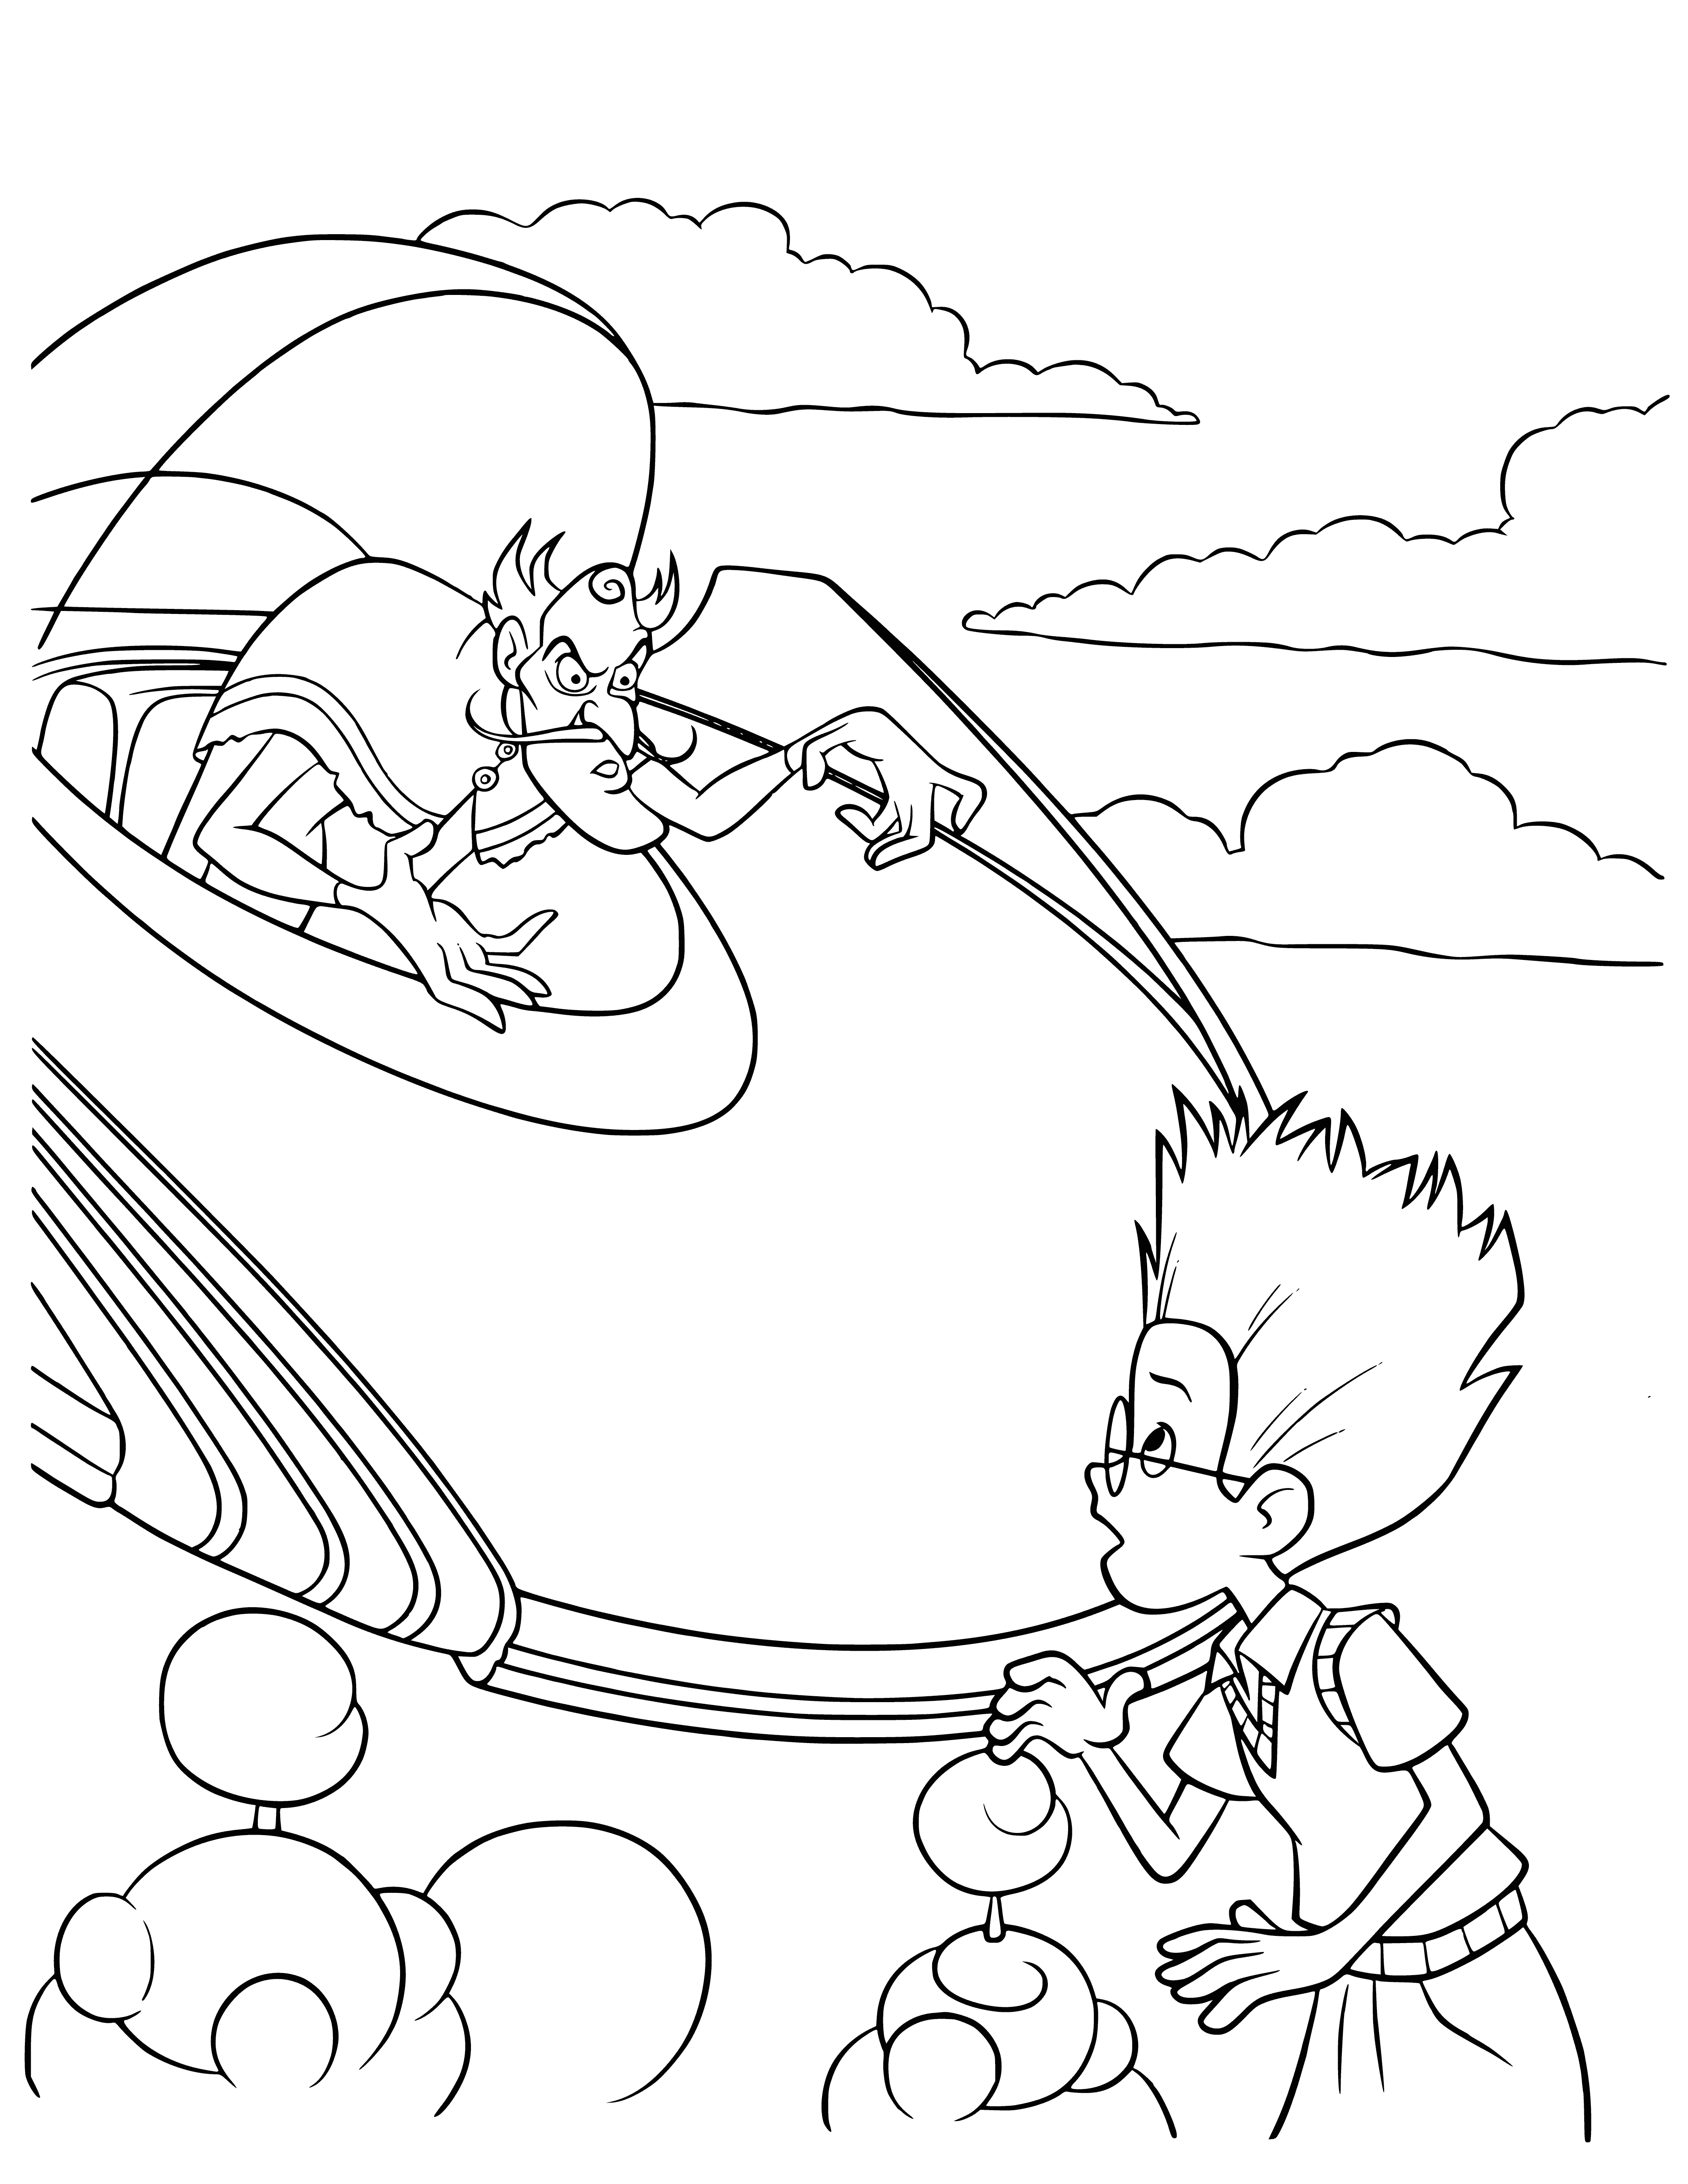 Flying saucer coloring page